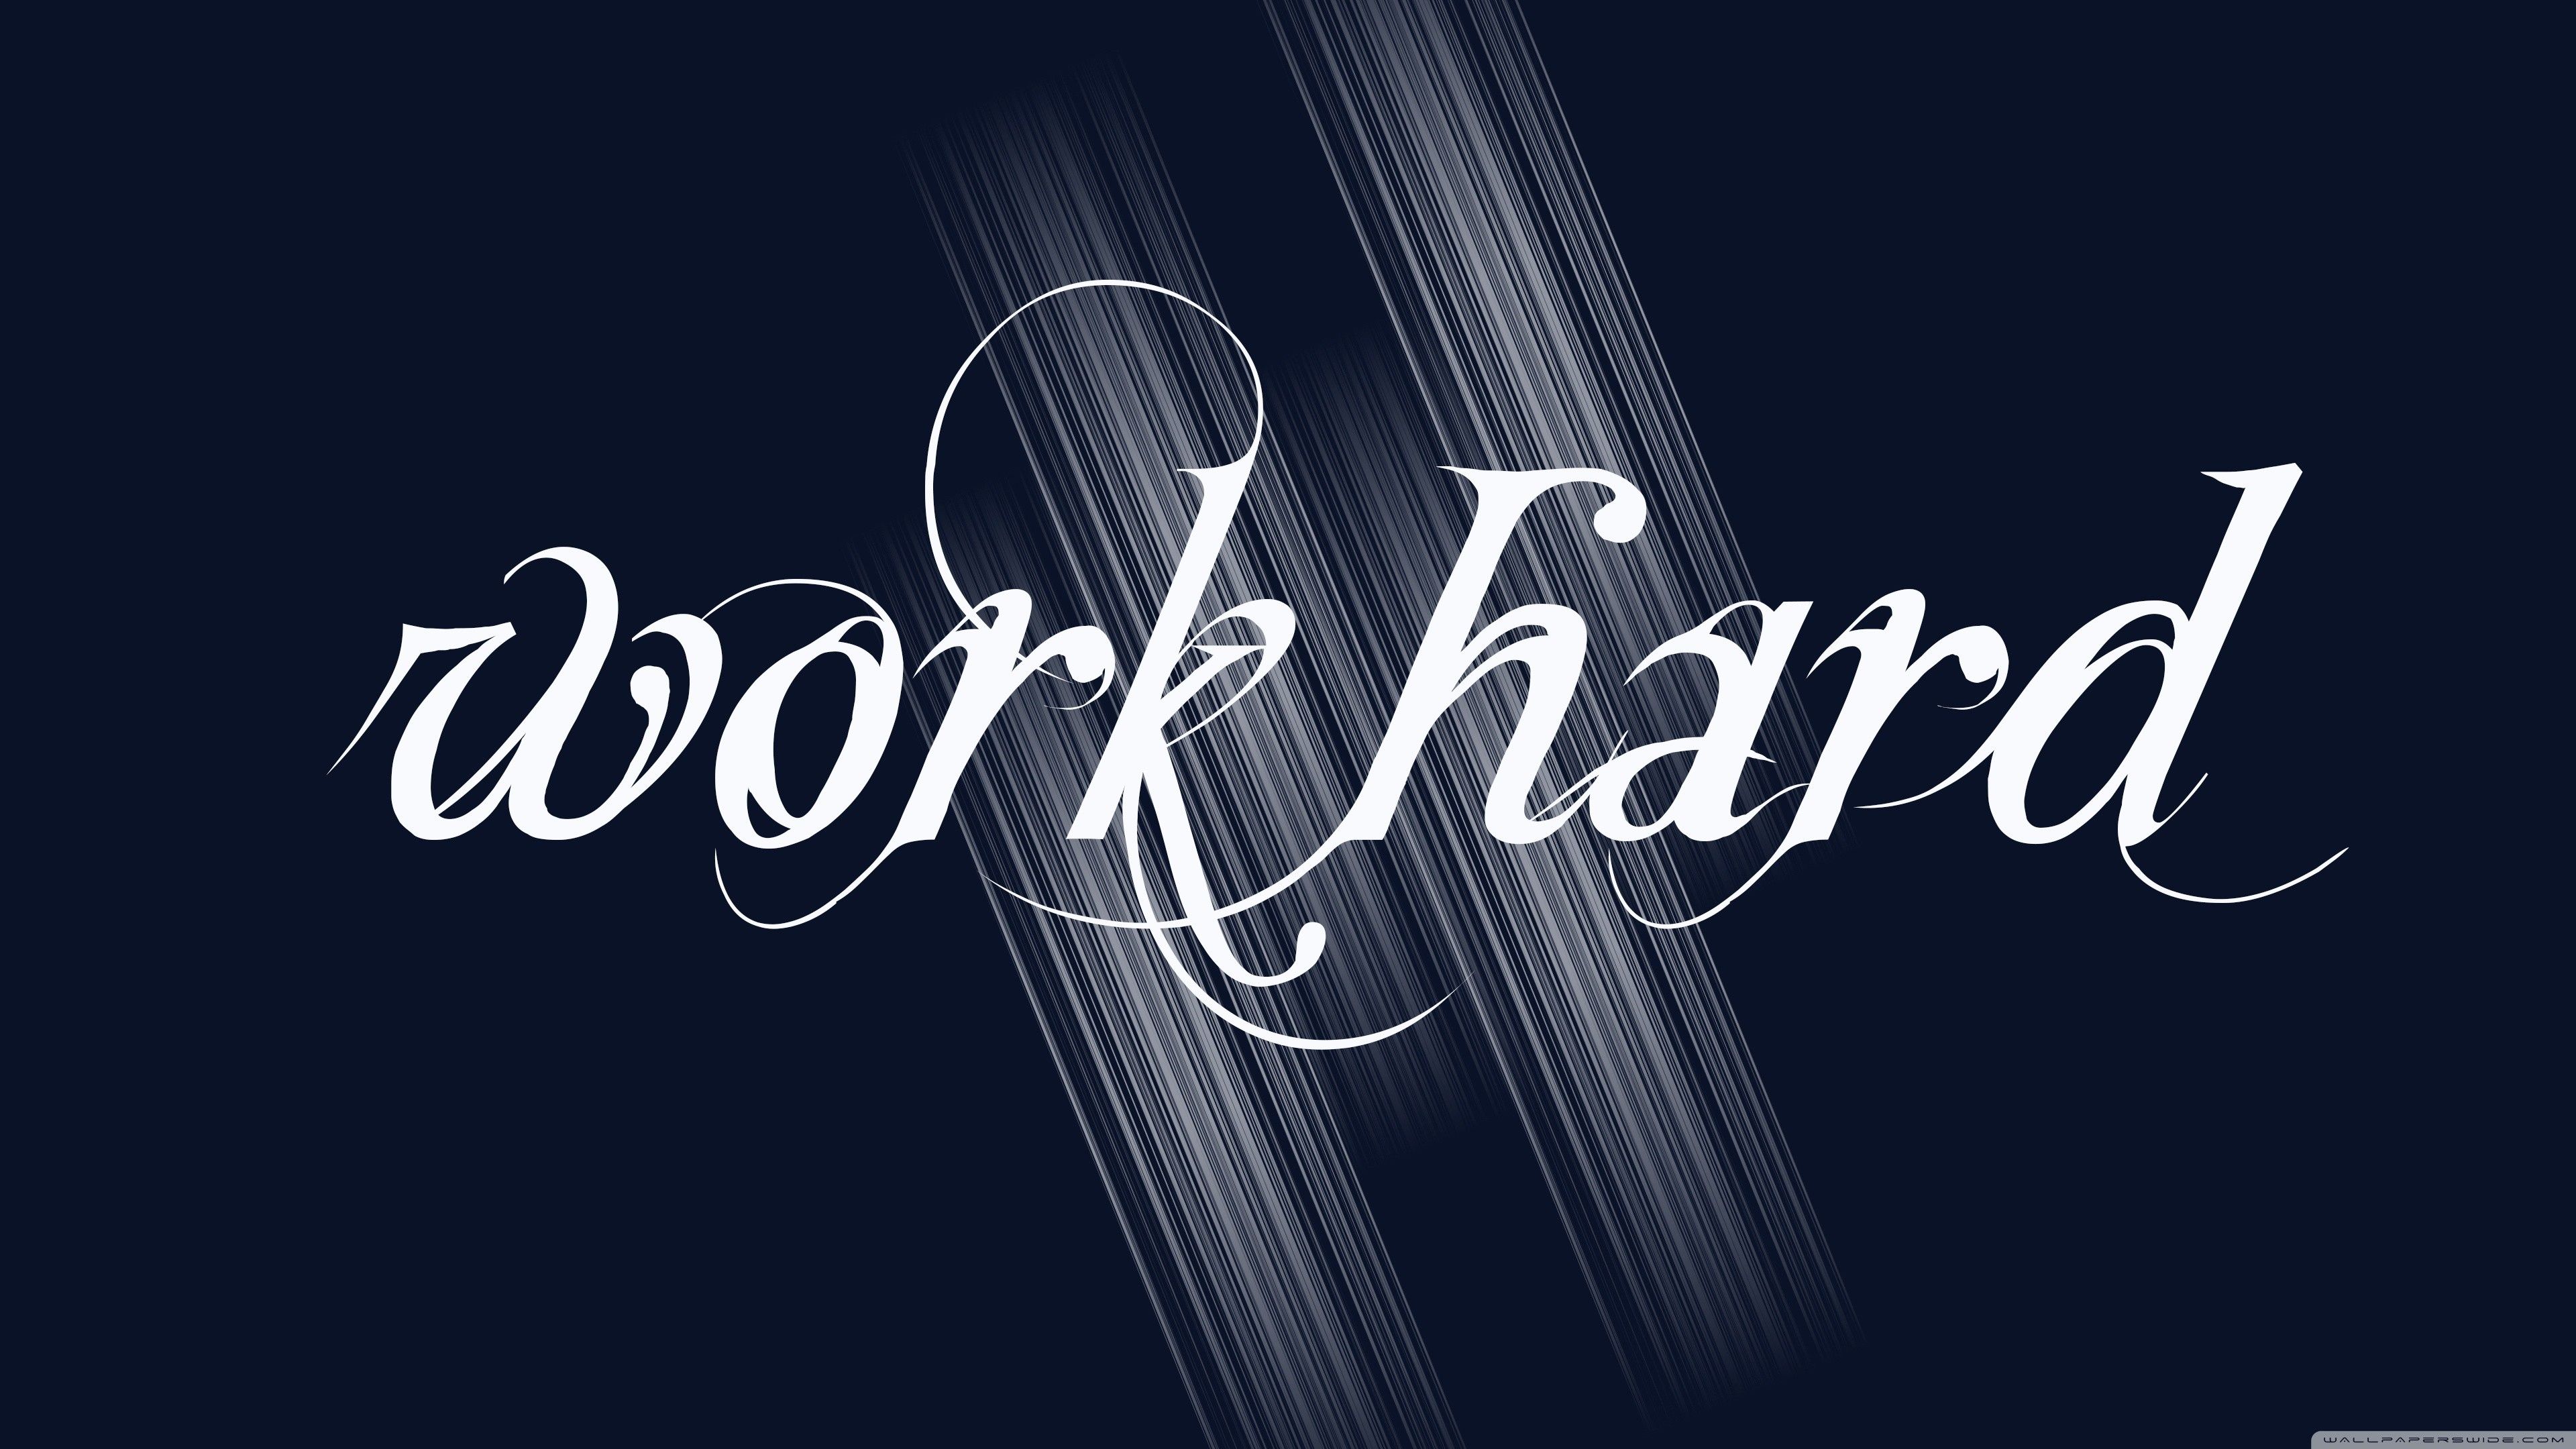 Work Hard Wallpaper. Quotes wallpaper for mobile, Inspirational quotes wallpaper, Hard work quotes